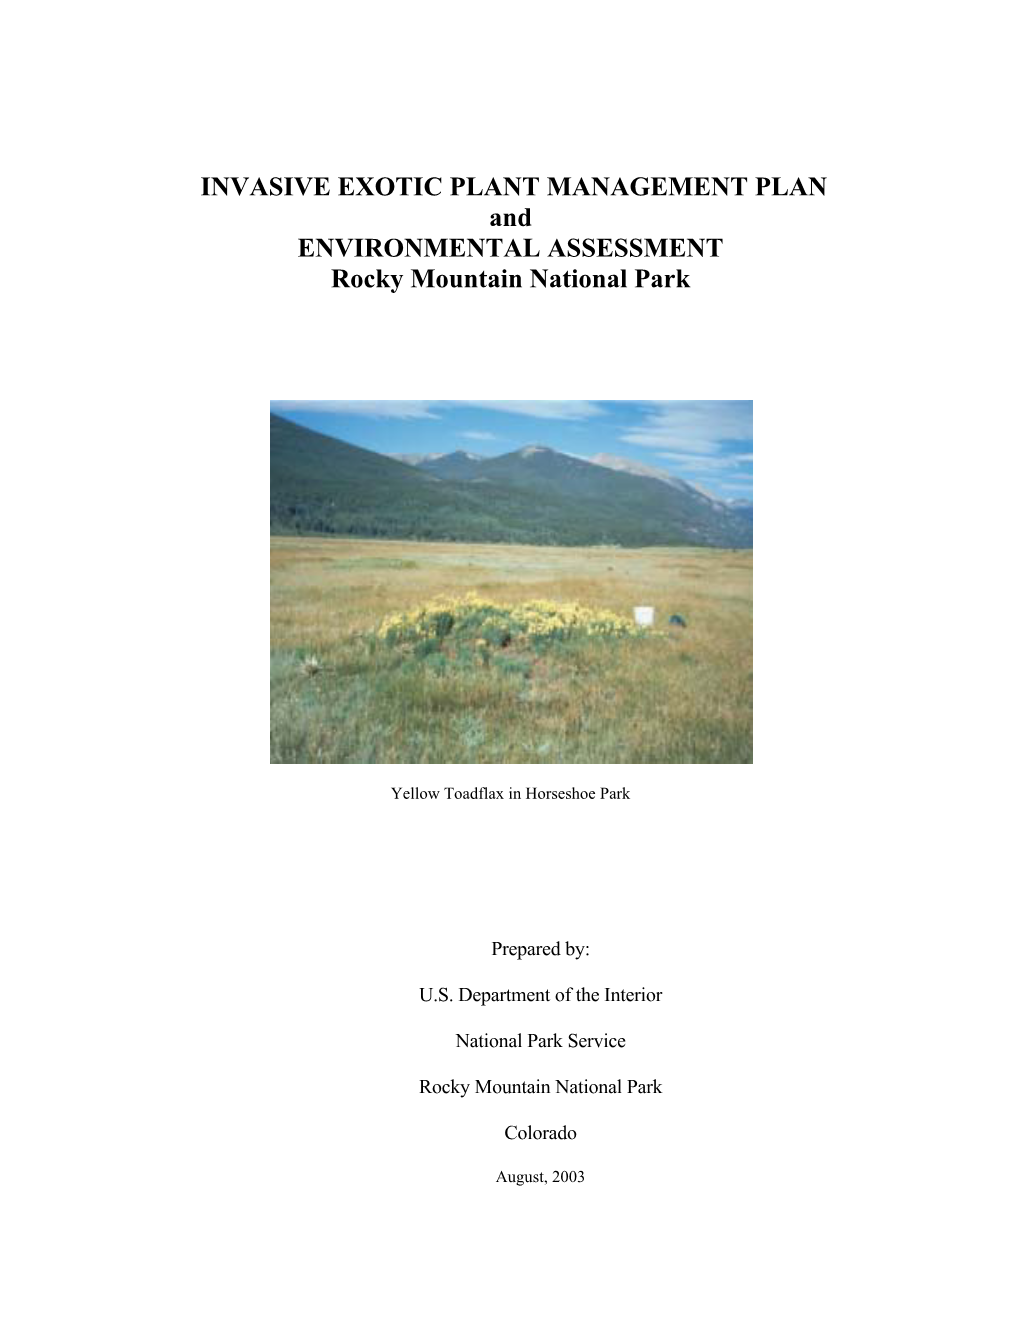 INVASIVE EXOTIC PLANT MANAGEMENT PLAN and ENVIRONMENTAL ASSESSMENT Rocky Mountain National Park